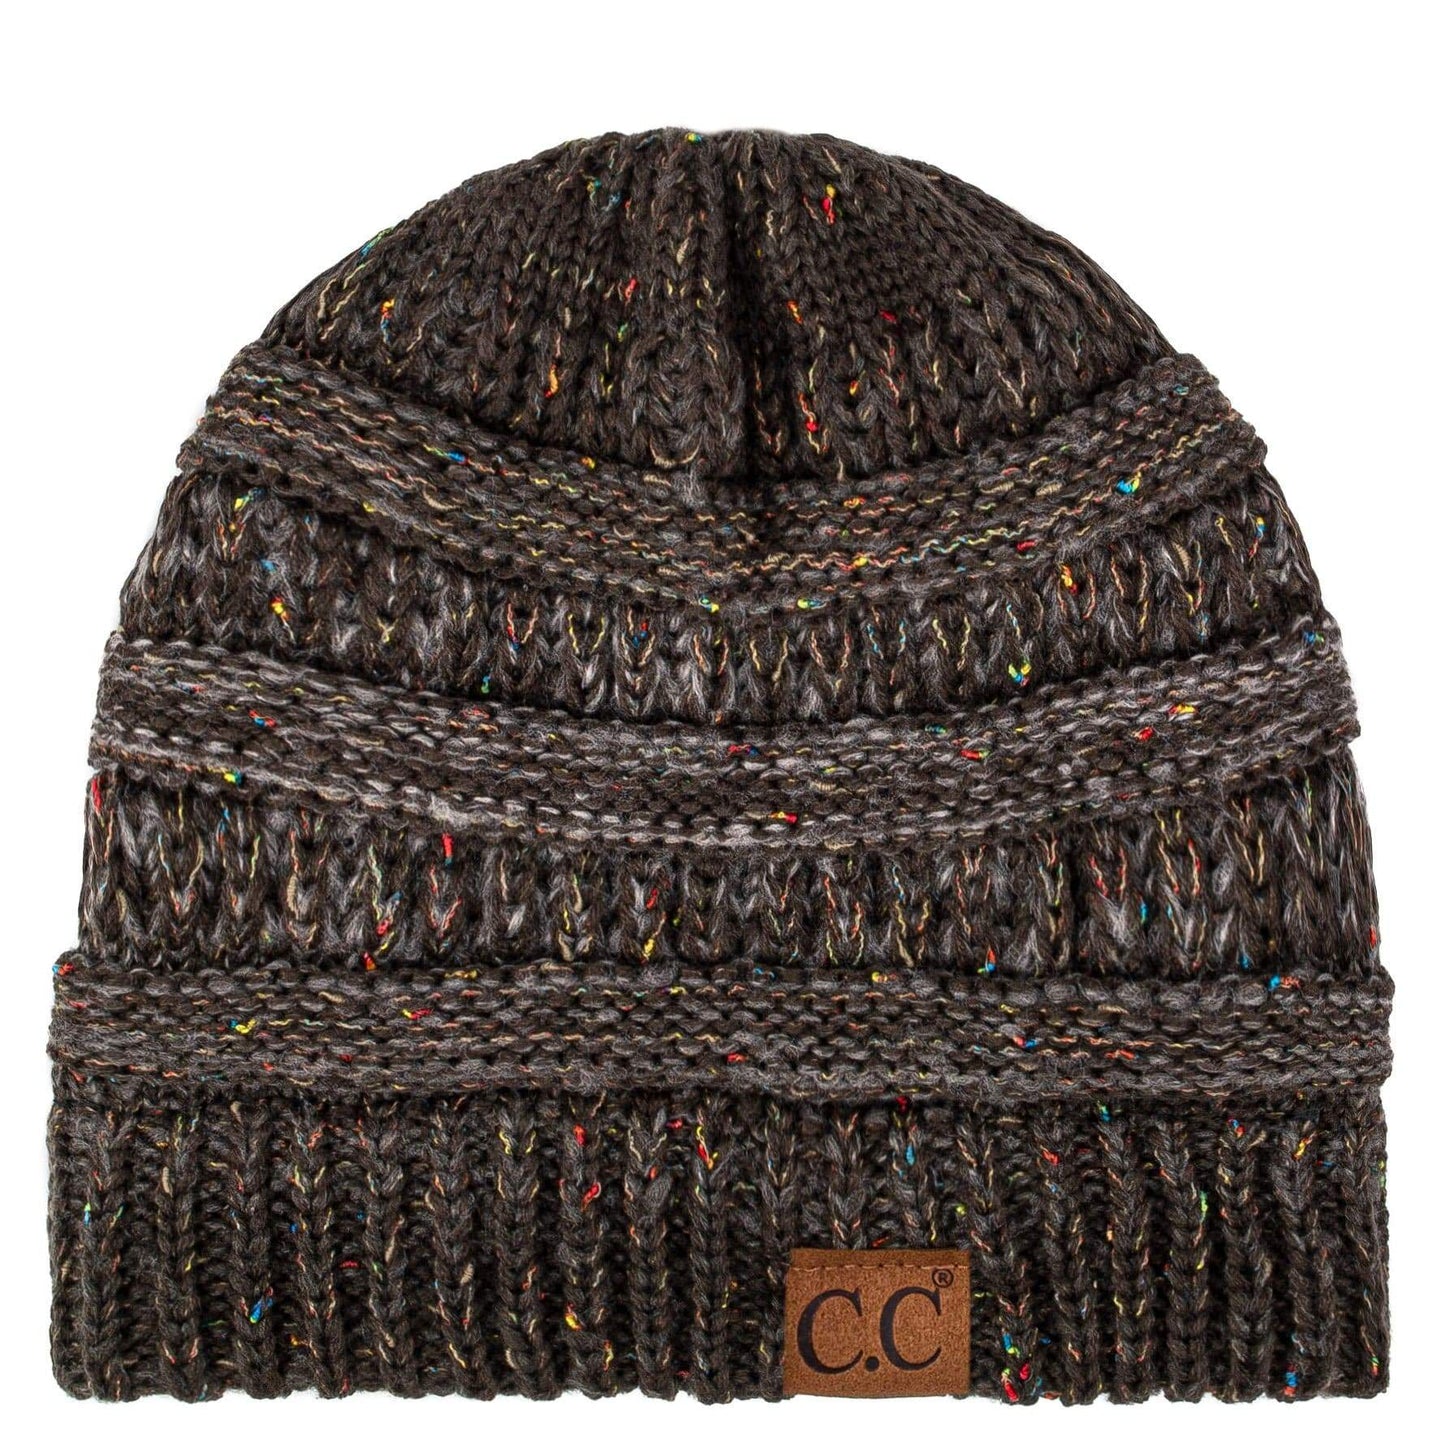 C.C Apparel Ombre Brown C.C Trendy Warm Chunky Soft Stretch Ombre Cable Knit Beanie Skully